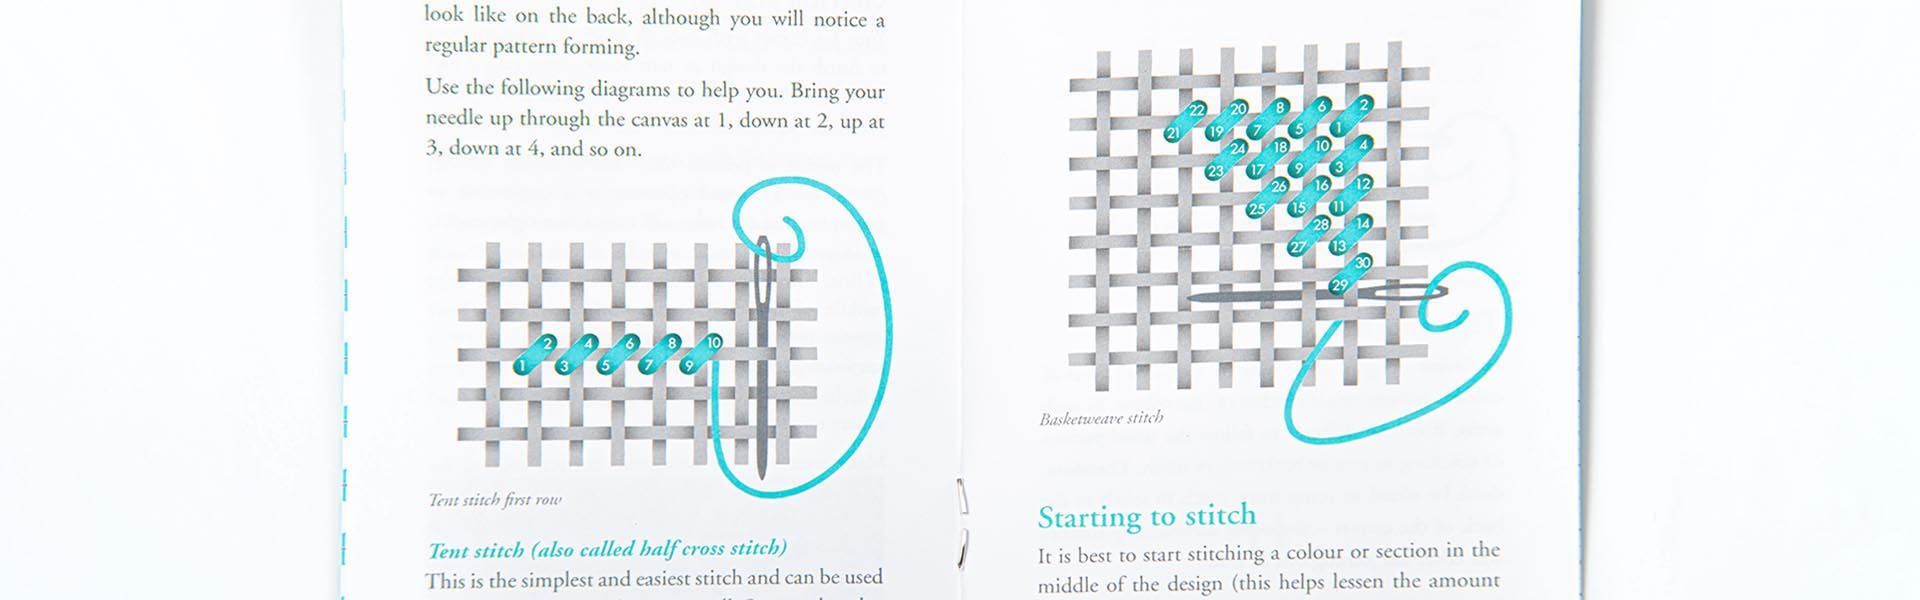 a book is open to a page about starting to stitch